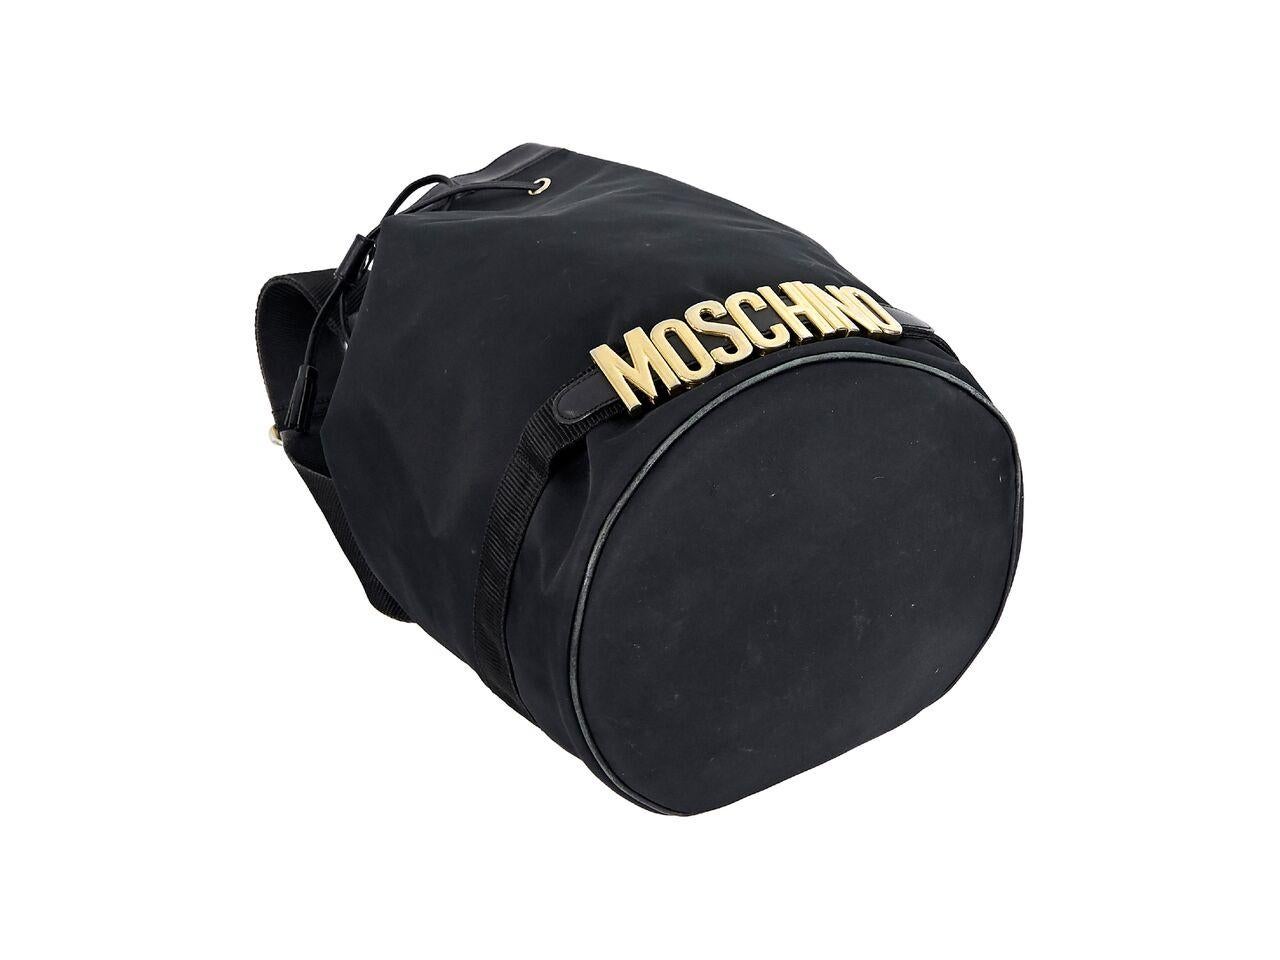 Product details:  Vintage black nylon bucket bag by Moschino.  Trimmed with leather.  Single adjustable shoulder strap.  Top drawstring closure.  Lined interior with inner attached zip pouch.  Logo charms accent bottom.  Goldtone hardware.  14